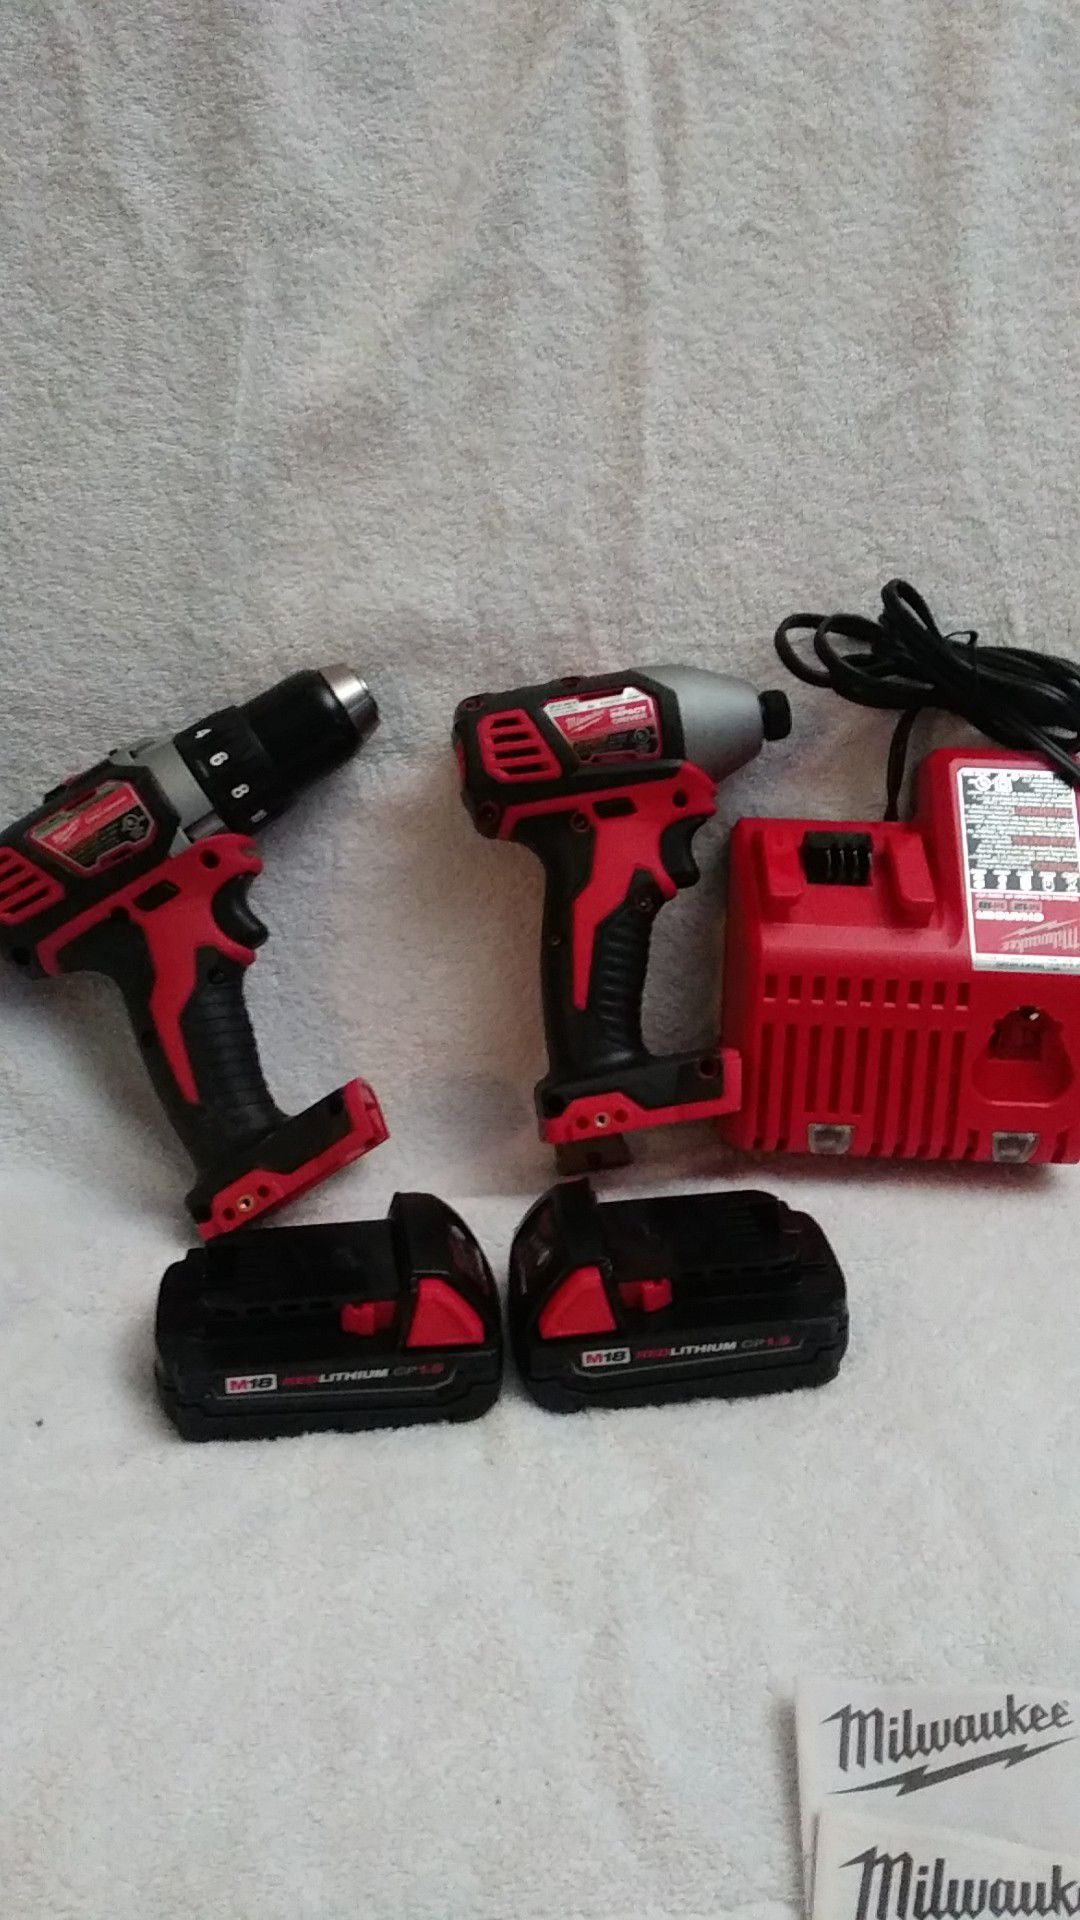 Cordless 1/2 drill driver .charger and 2 battery 18v. 1.5